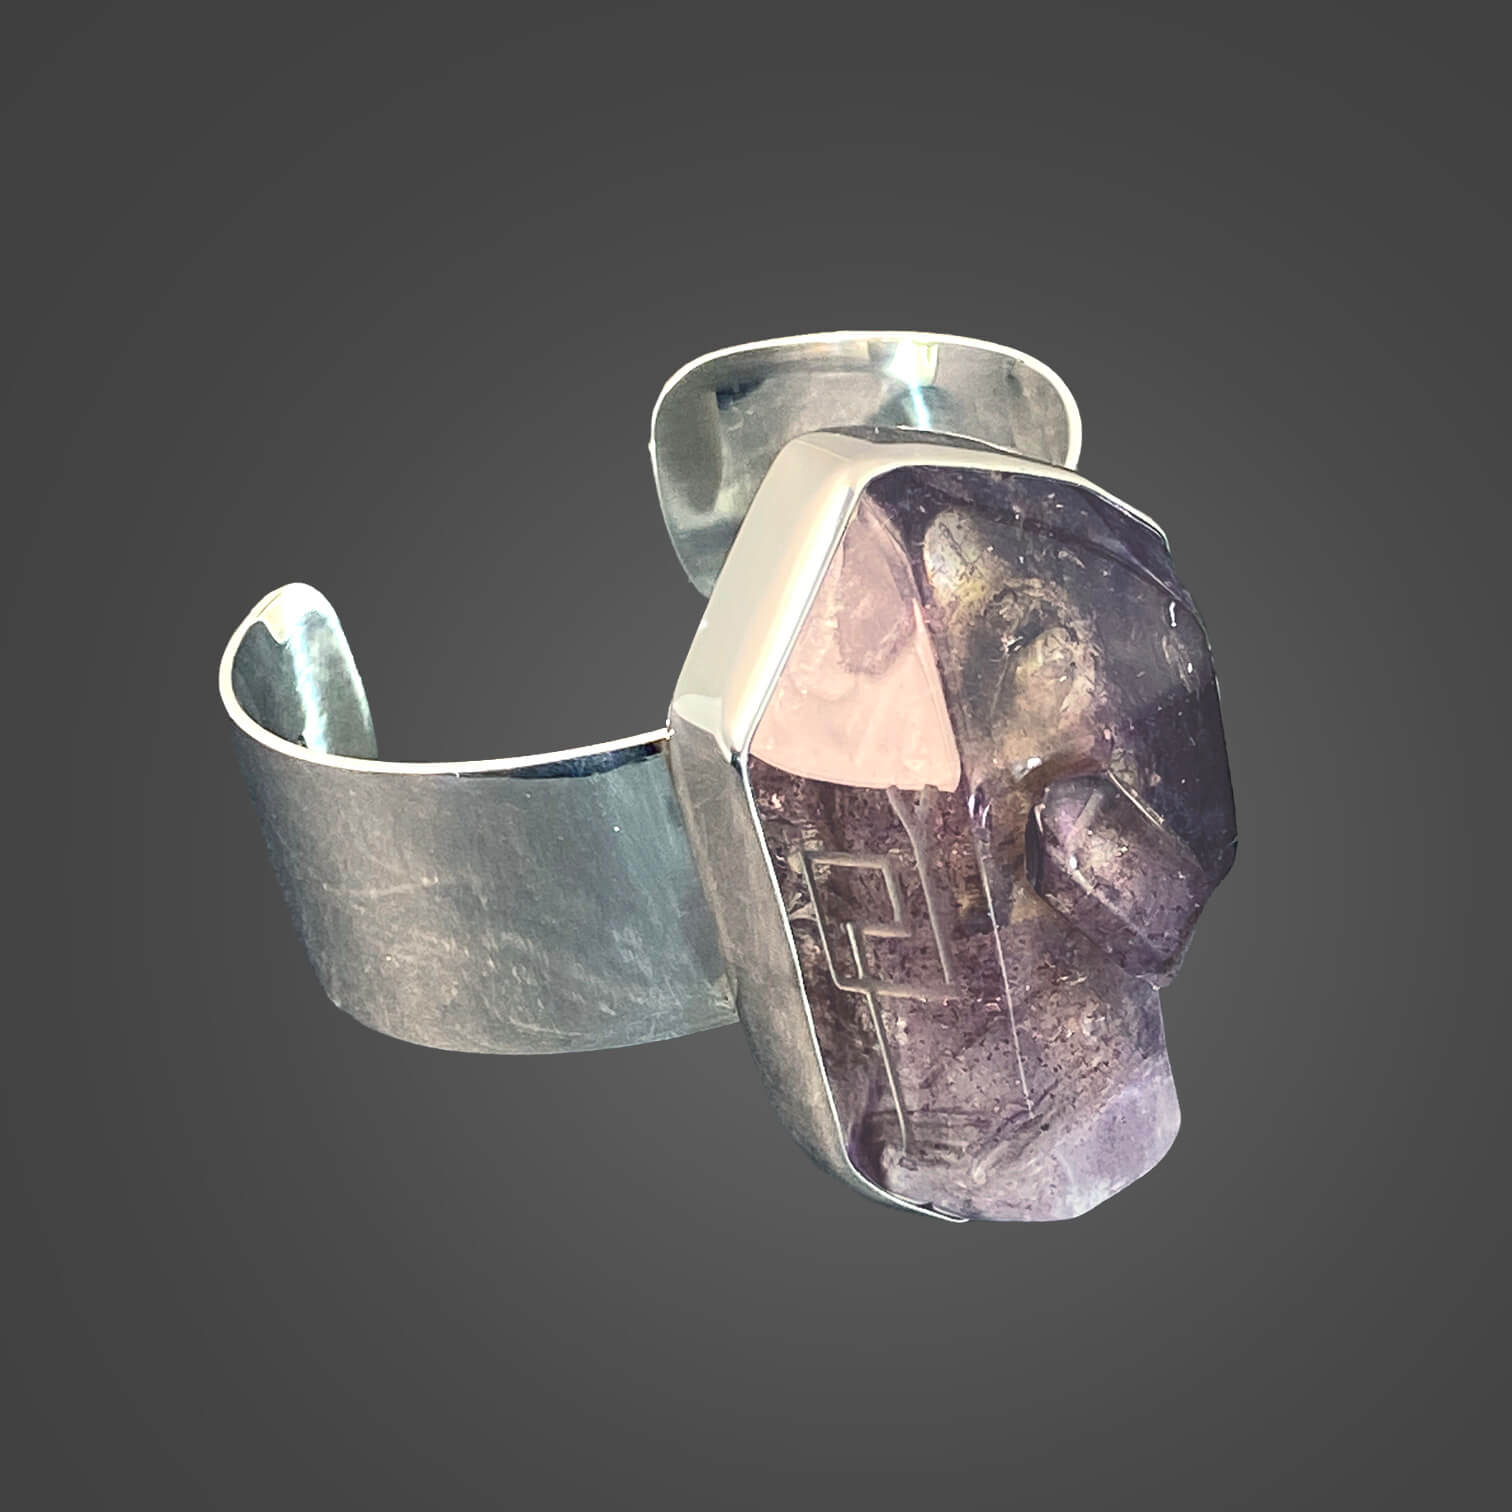 African Smoky Amethyst Sterling Silver Cuff Bracelet with Divine Feminine and Sacred Masculine Symbols